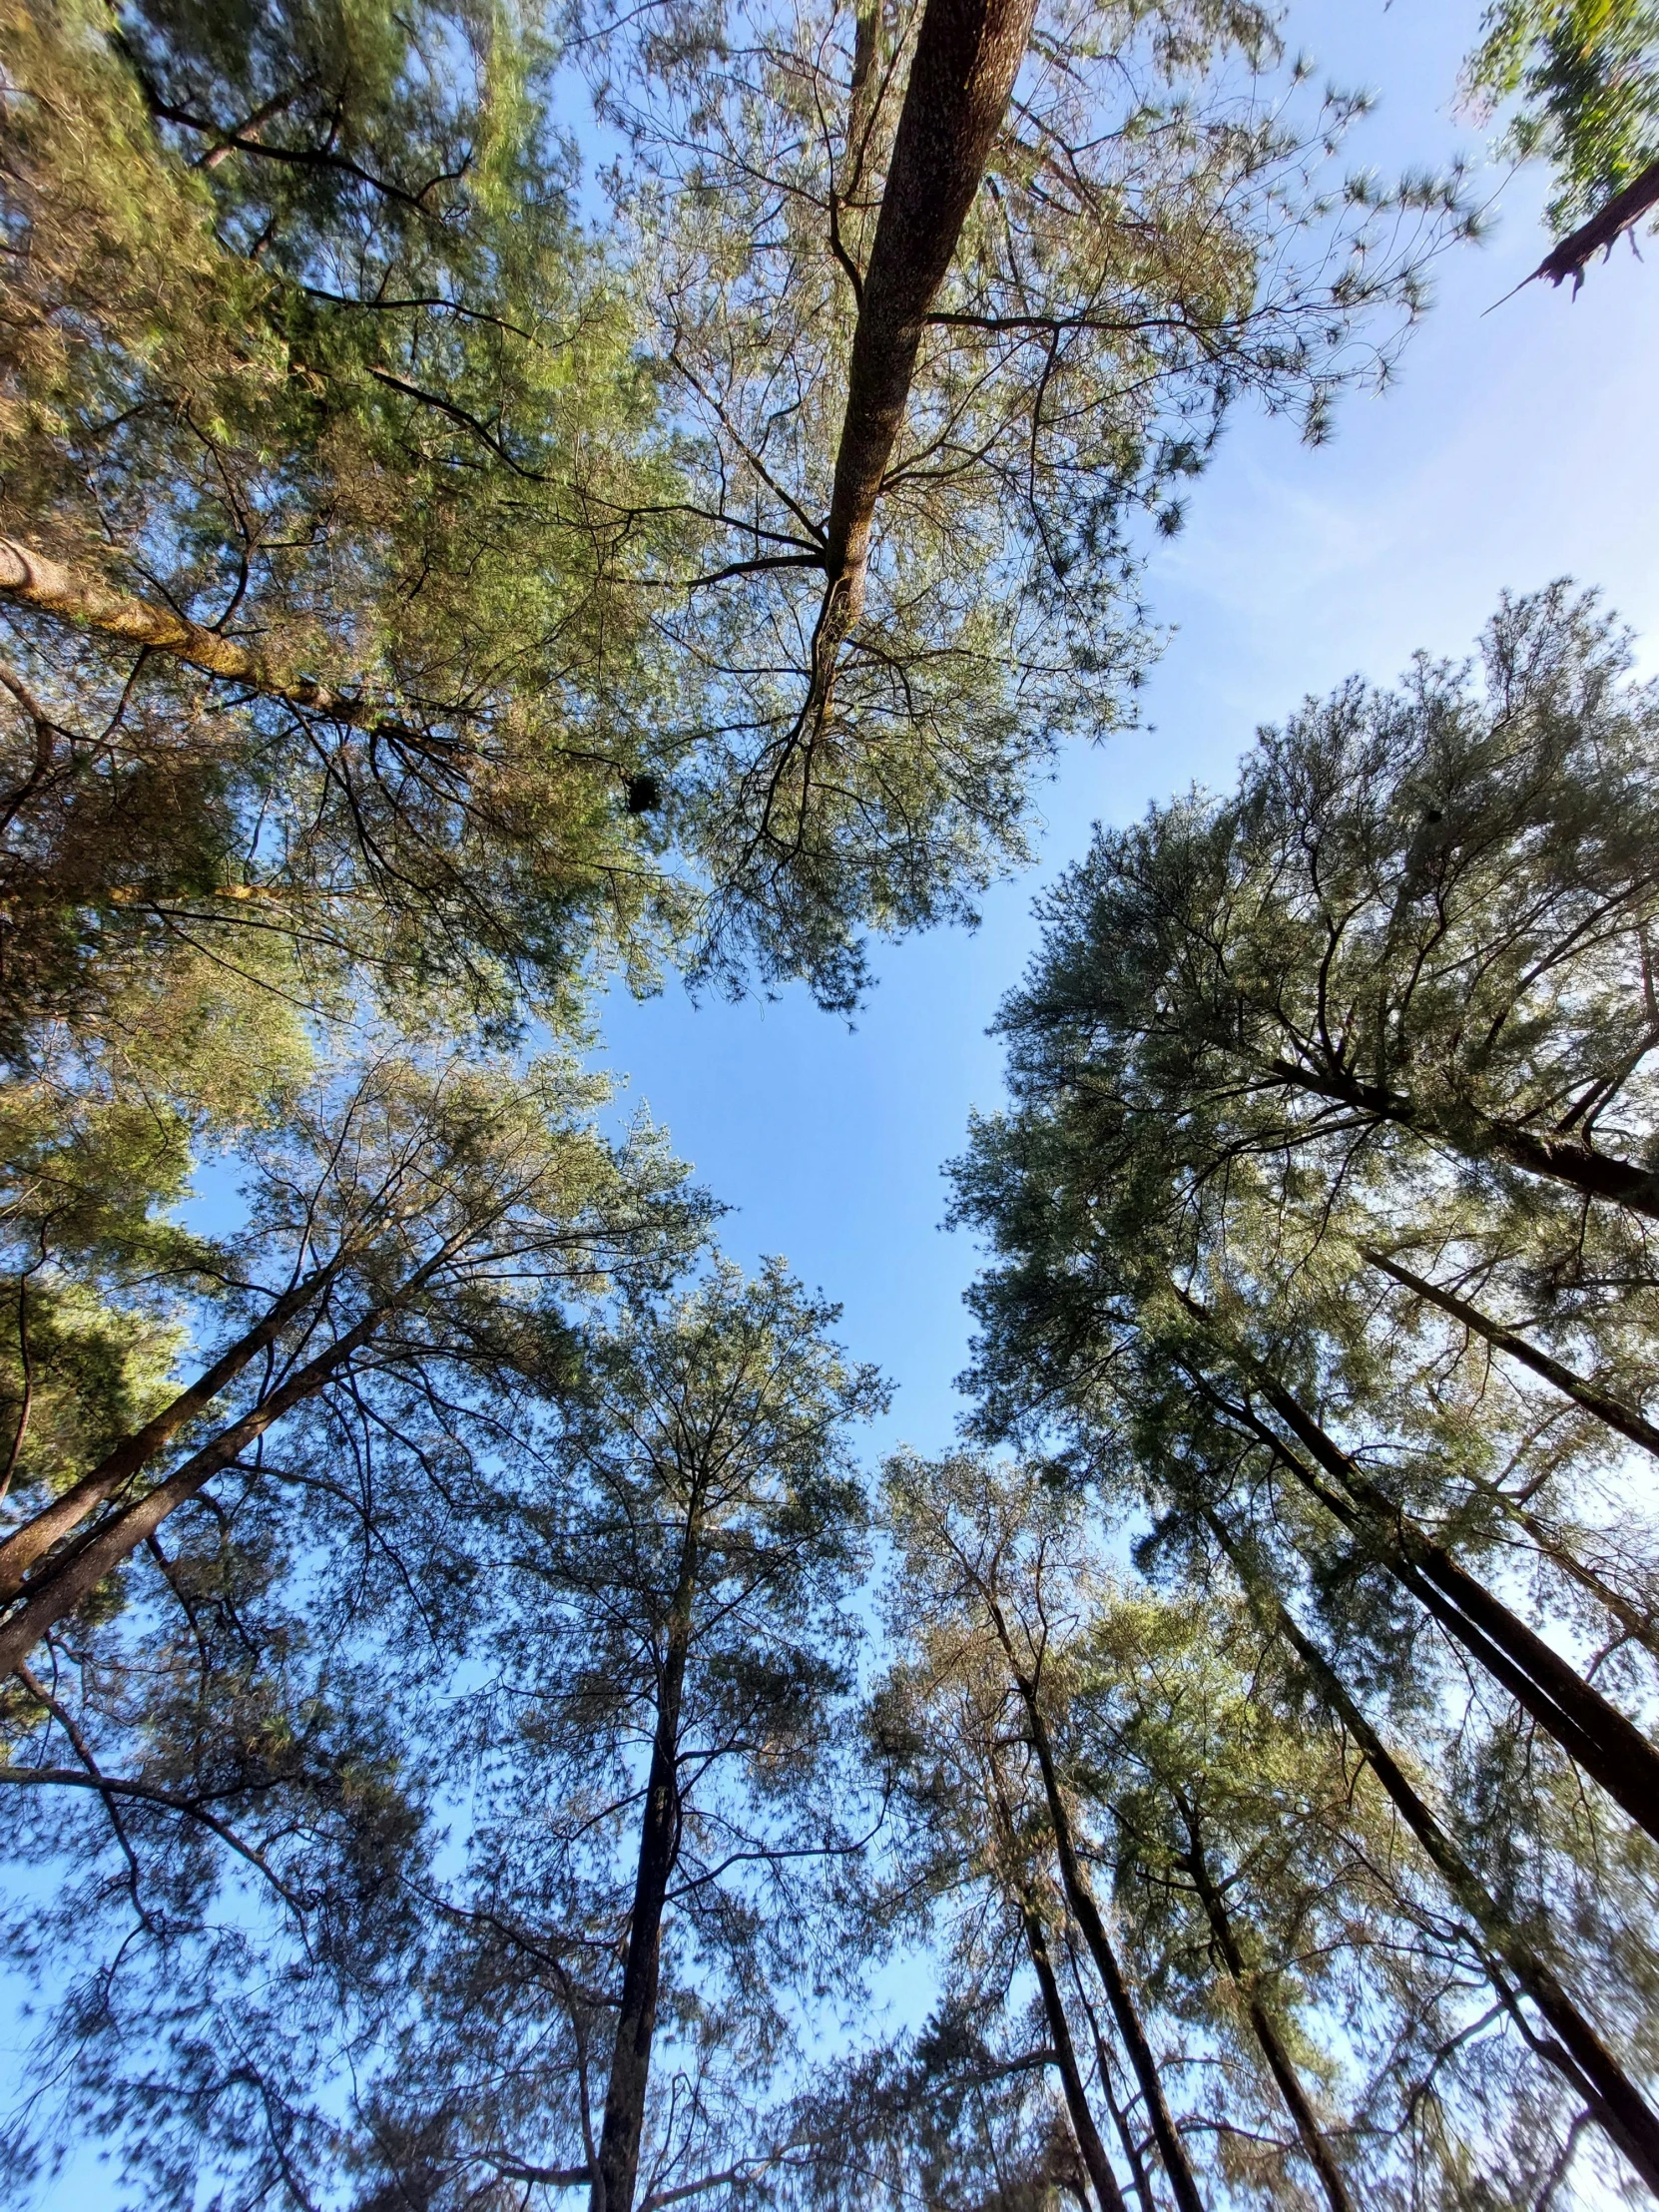 trees in a forest with many trunks up high